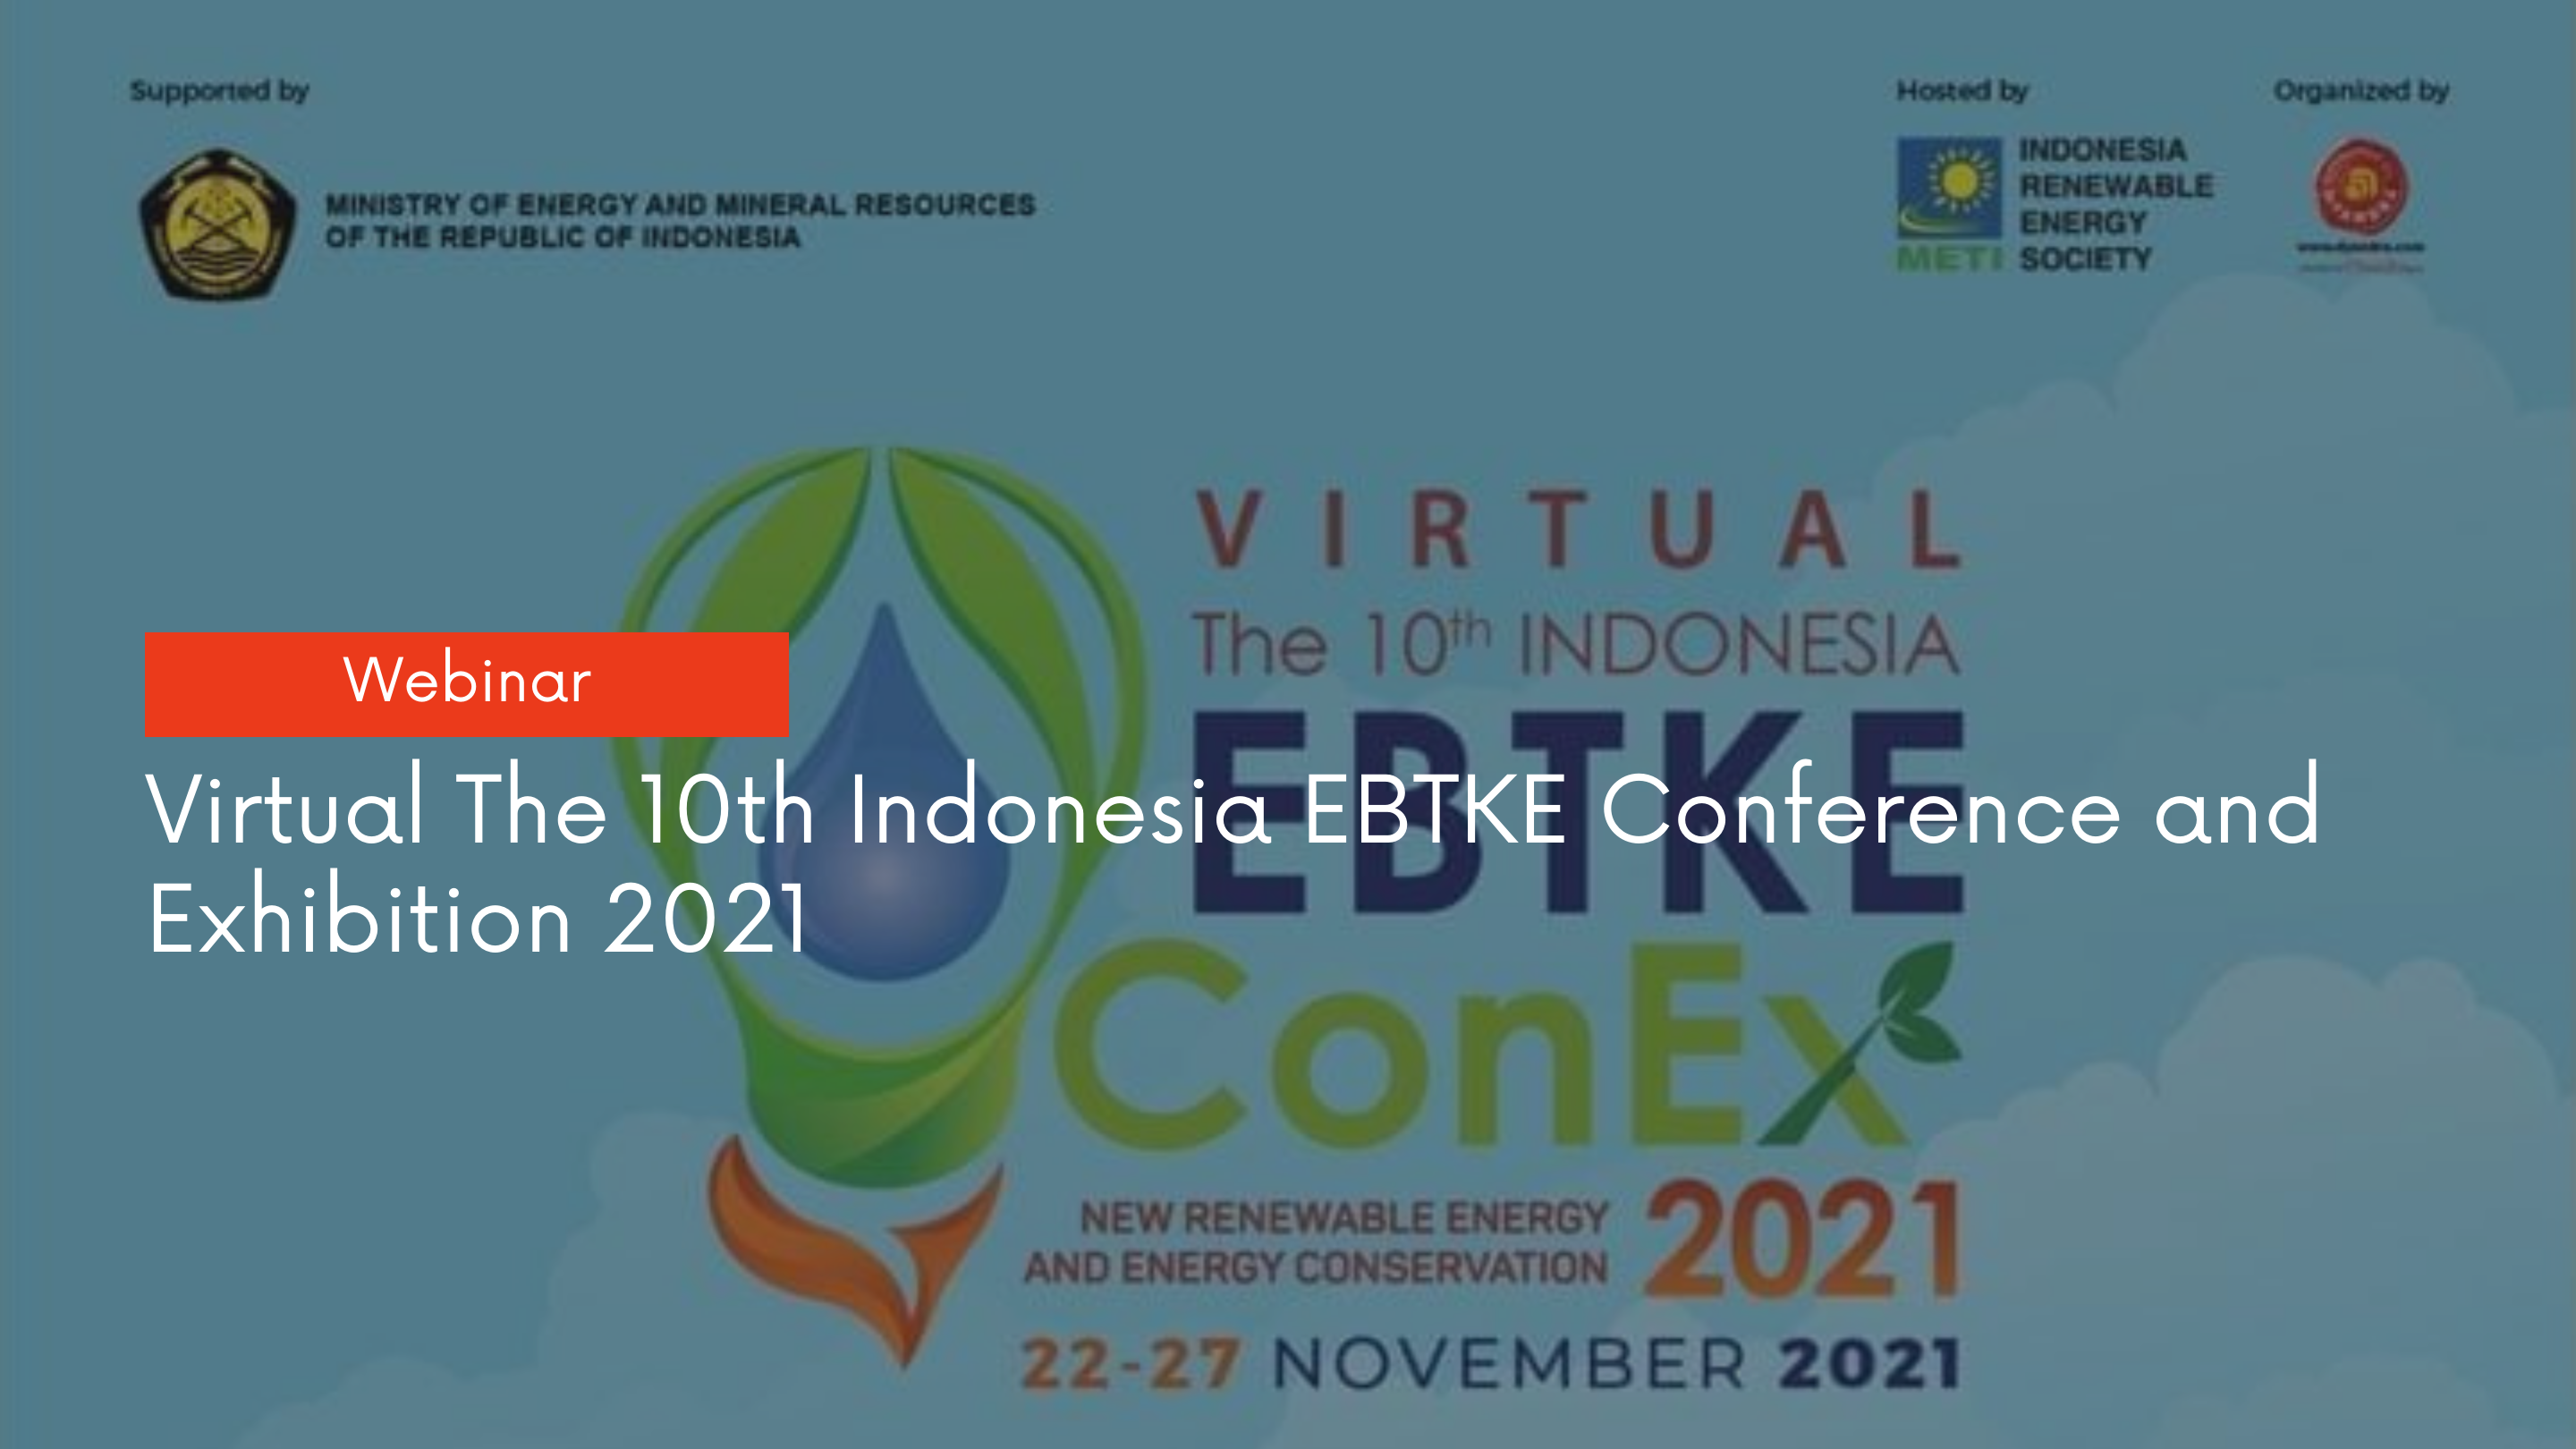 Virtual The 10th Indonesia EBTKE Conference and Exhibition 2021